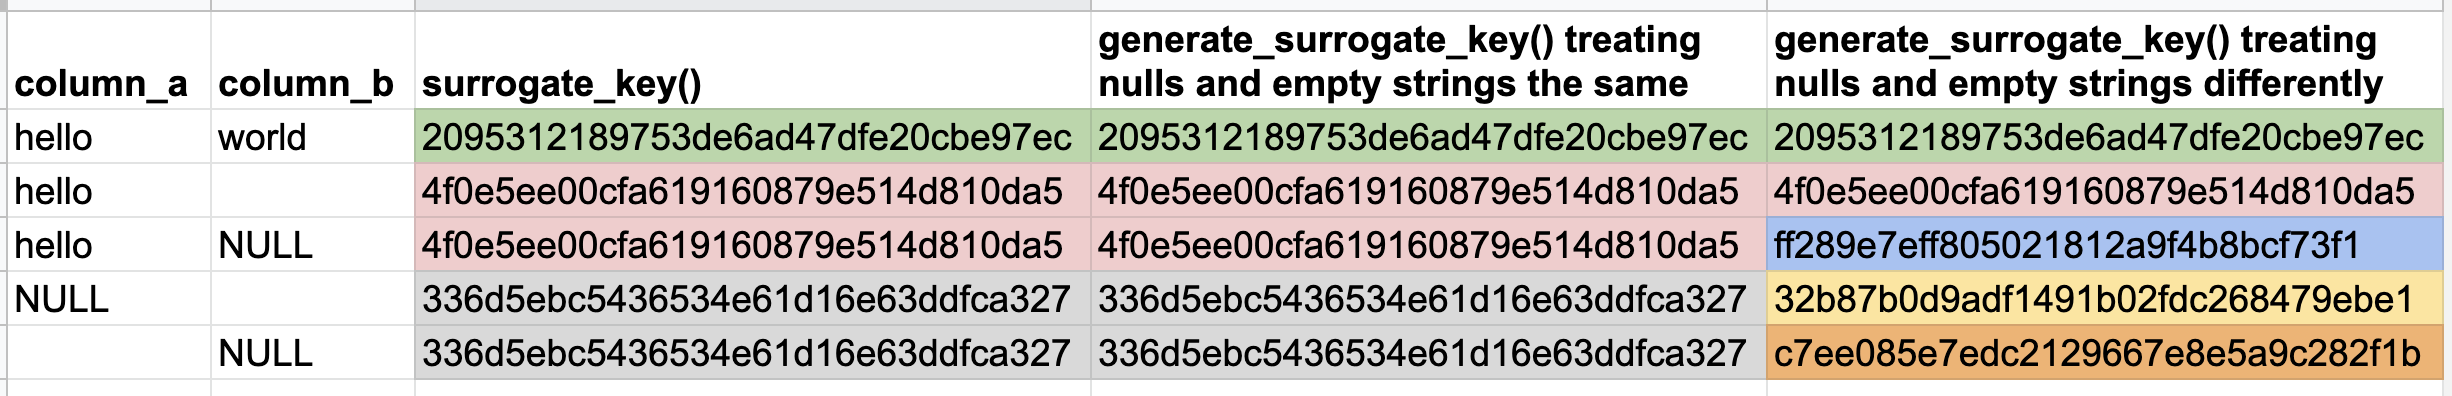 A table comparing the behavior of surrogate_key and generate_surrogate_key